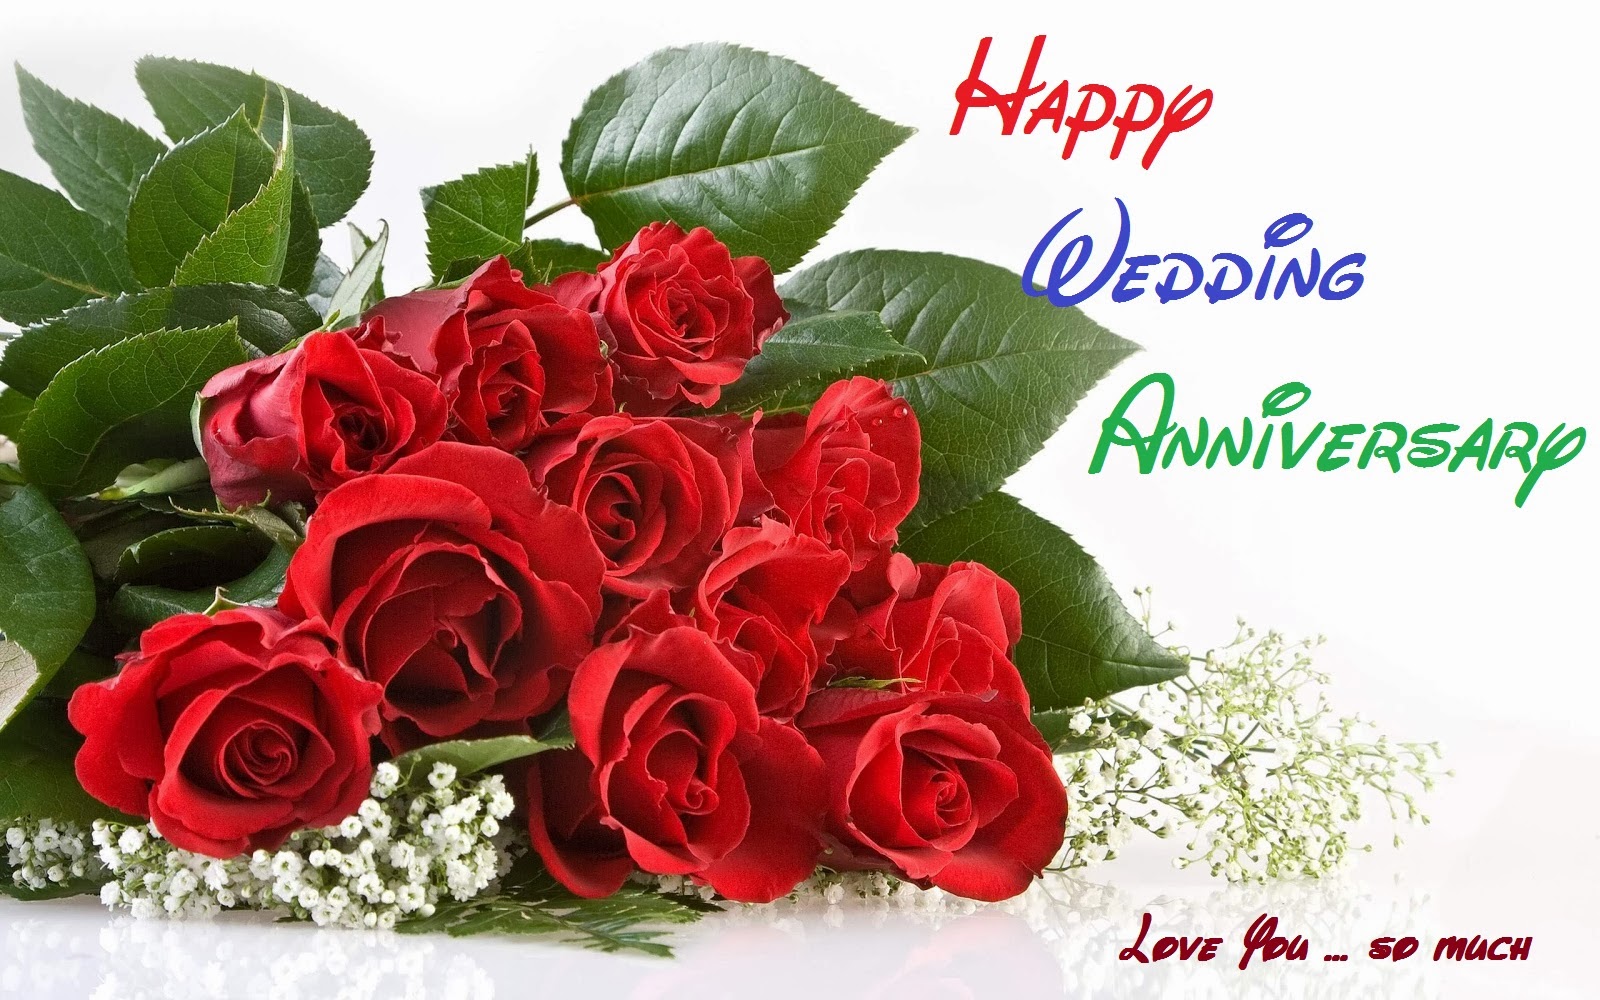 Best Wedding  Anniversary  Live  Photo s HD Wallpapers 